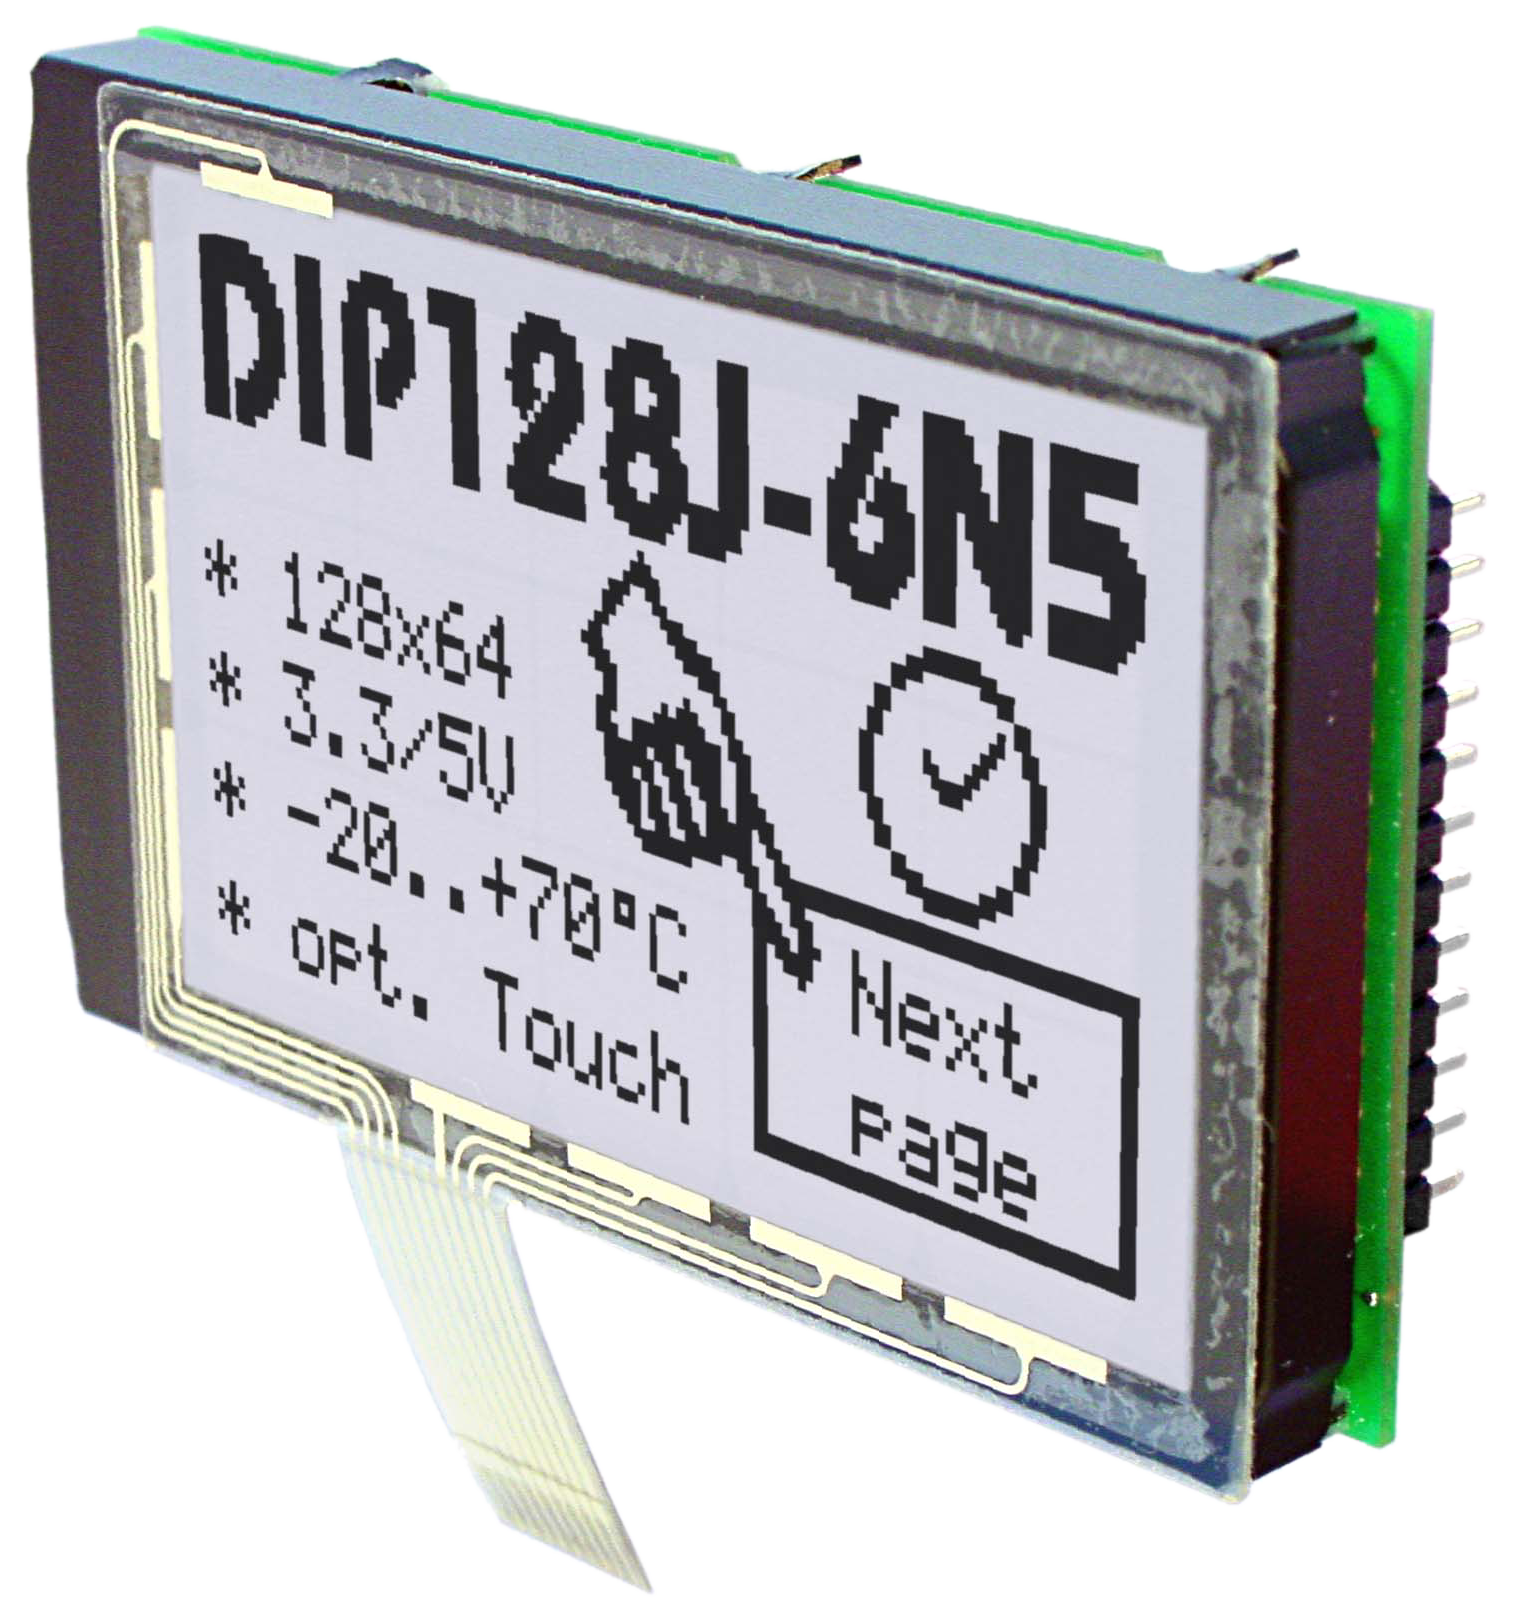 Oled Displays in Chip on Board (COB) technology, here EA DIP128 as a graphic display with 128x64 pixels